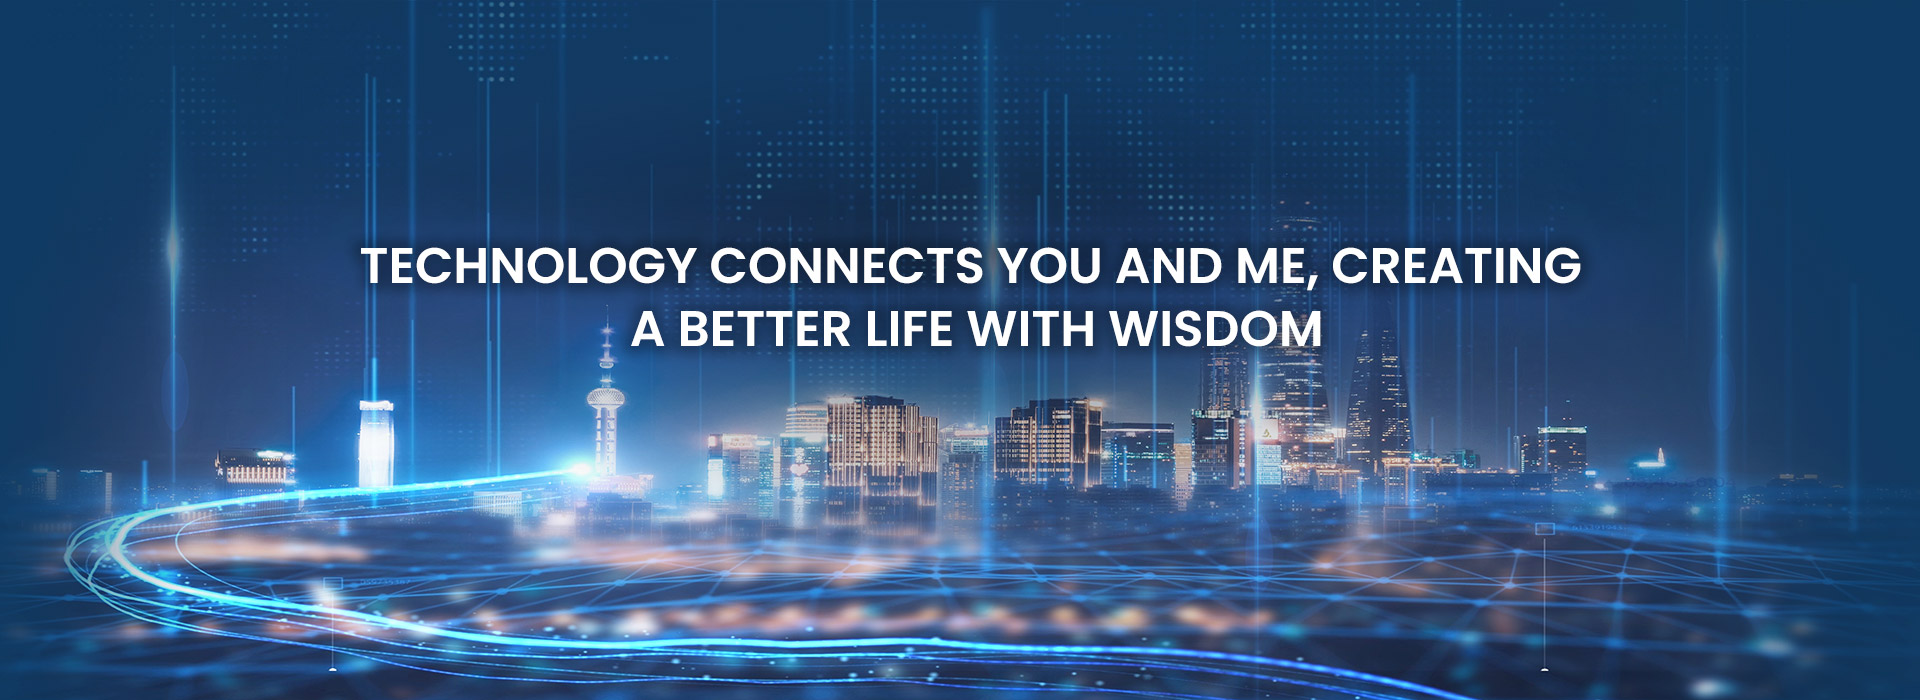 Technology connects you and me, creating  a better life with wisdom